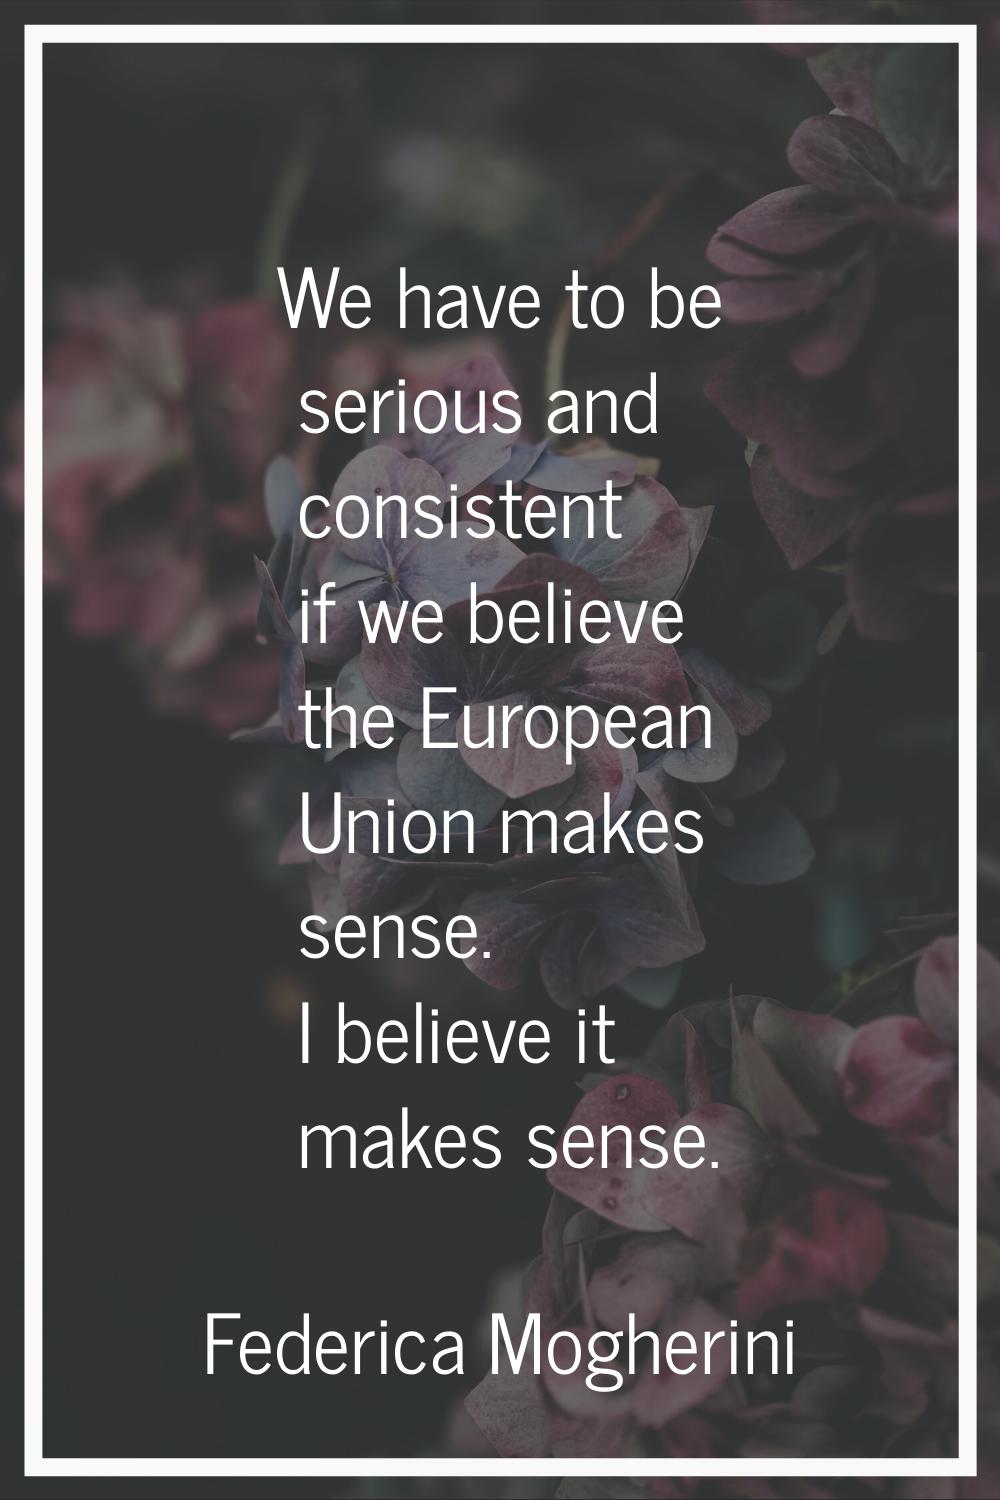 We have to be serious and consistent if we believe the European Union makes sense. I believe it mak